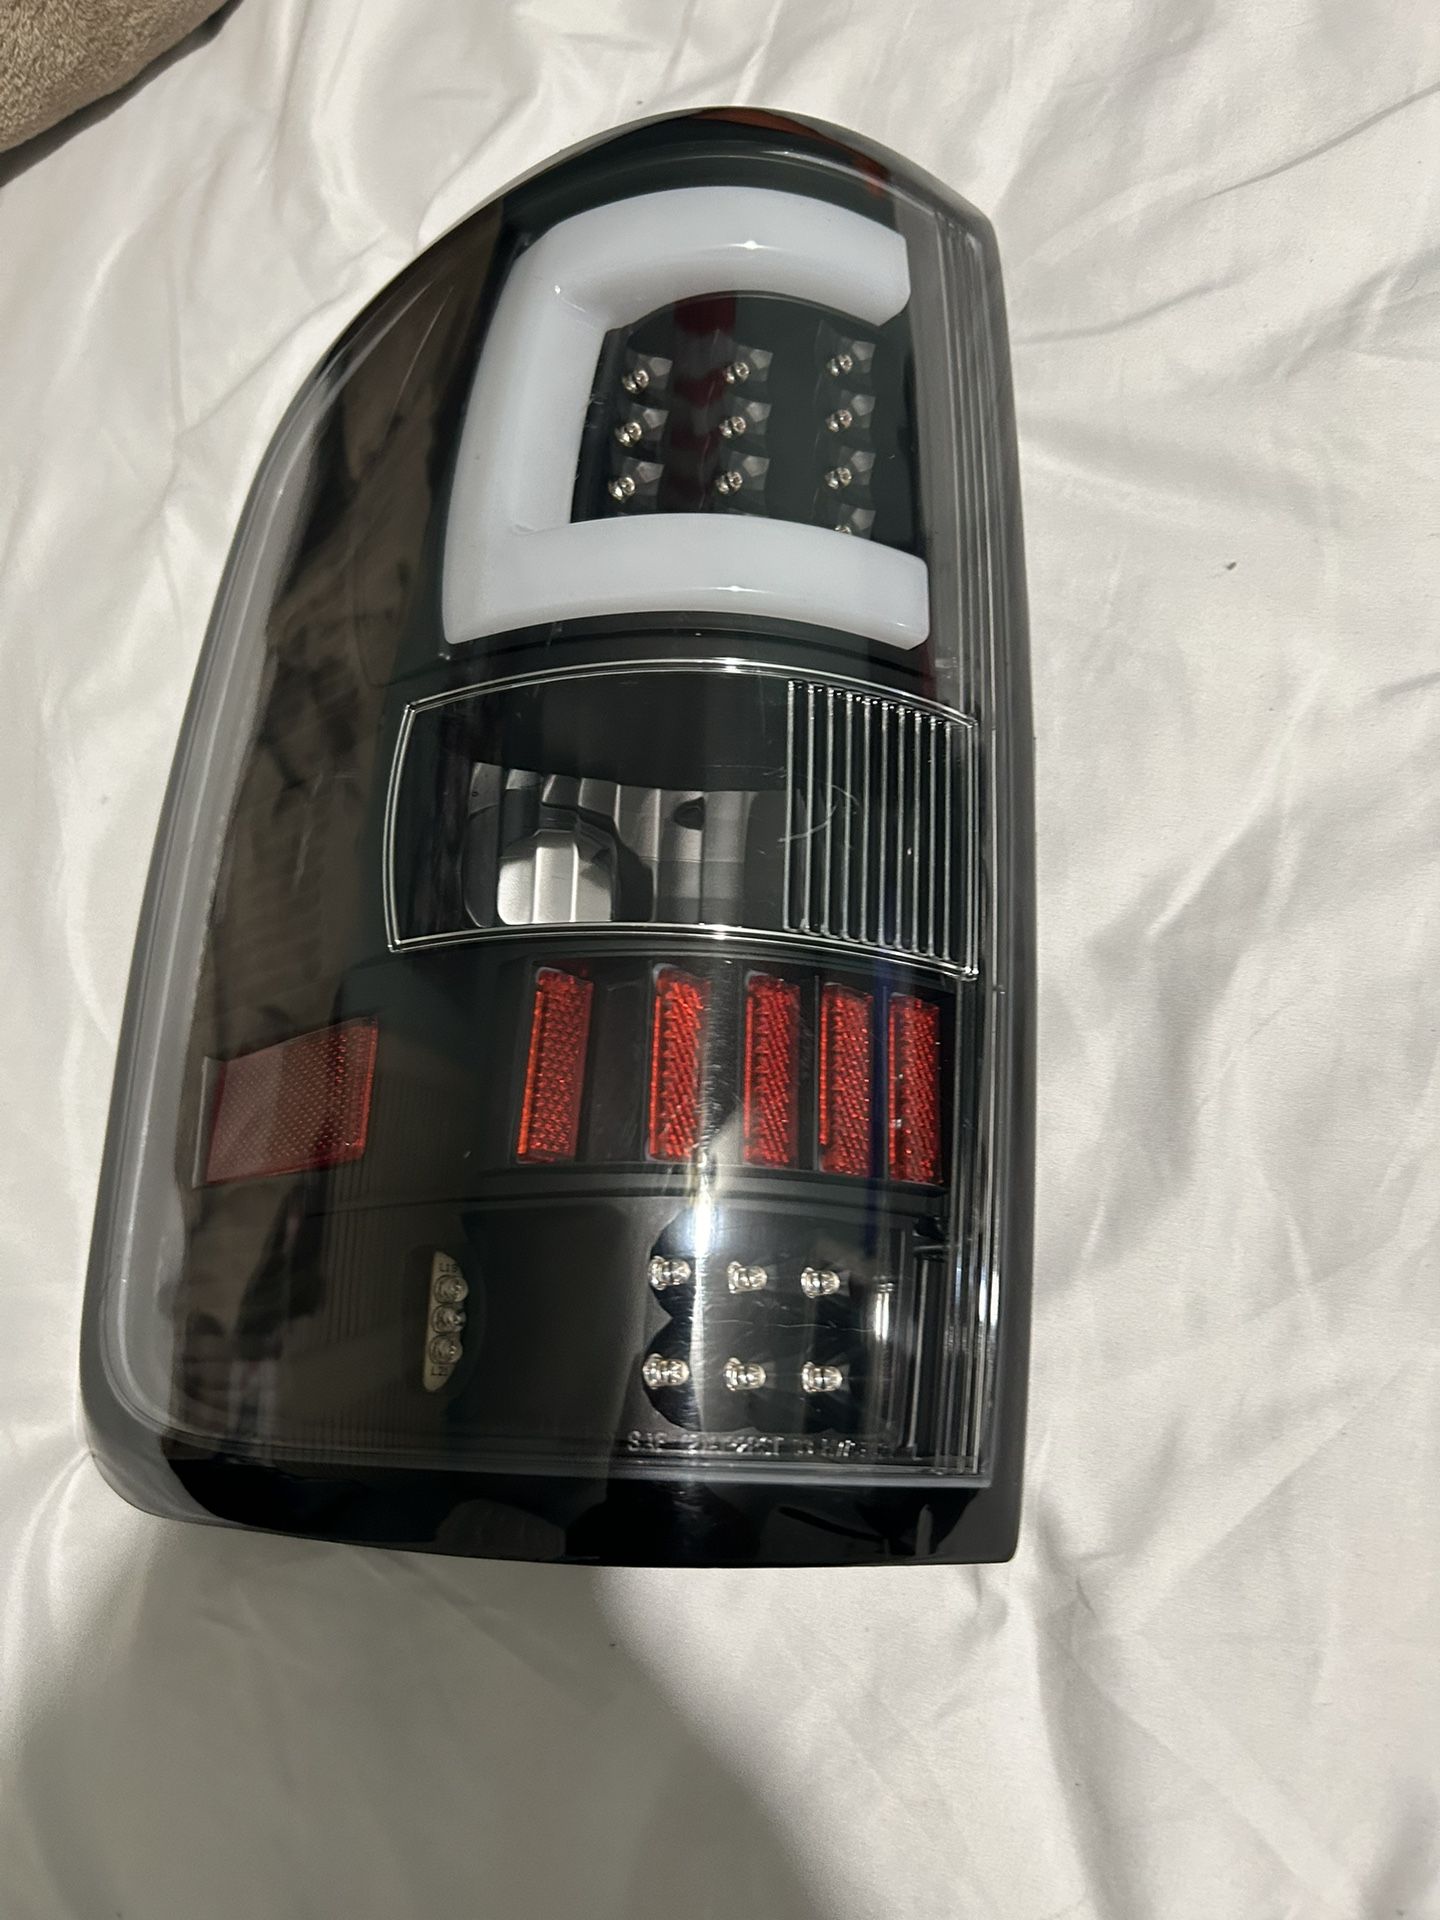 2006 Ford F150 Tail Lights